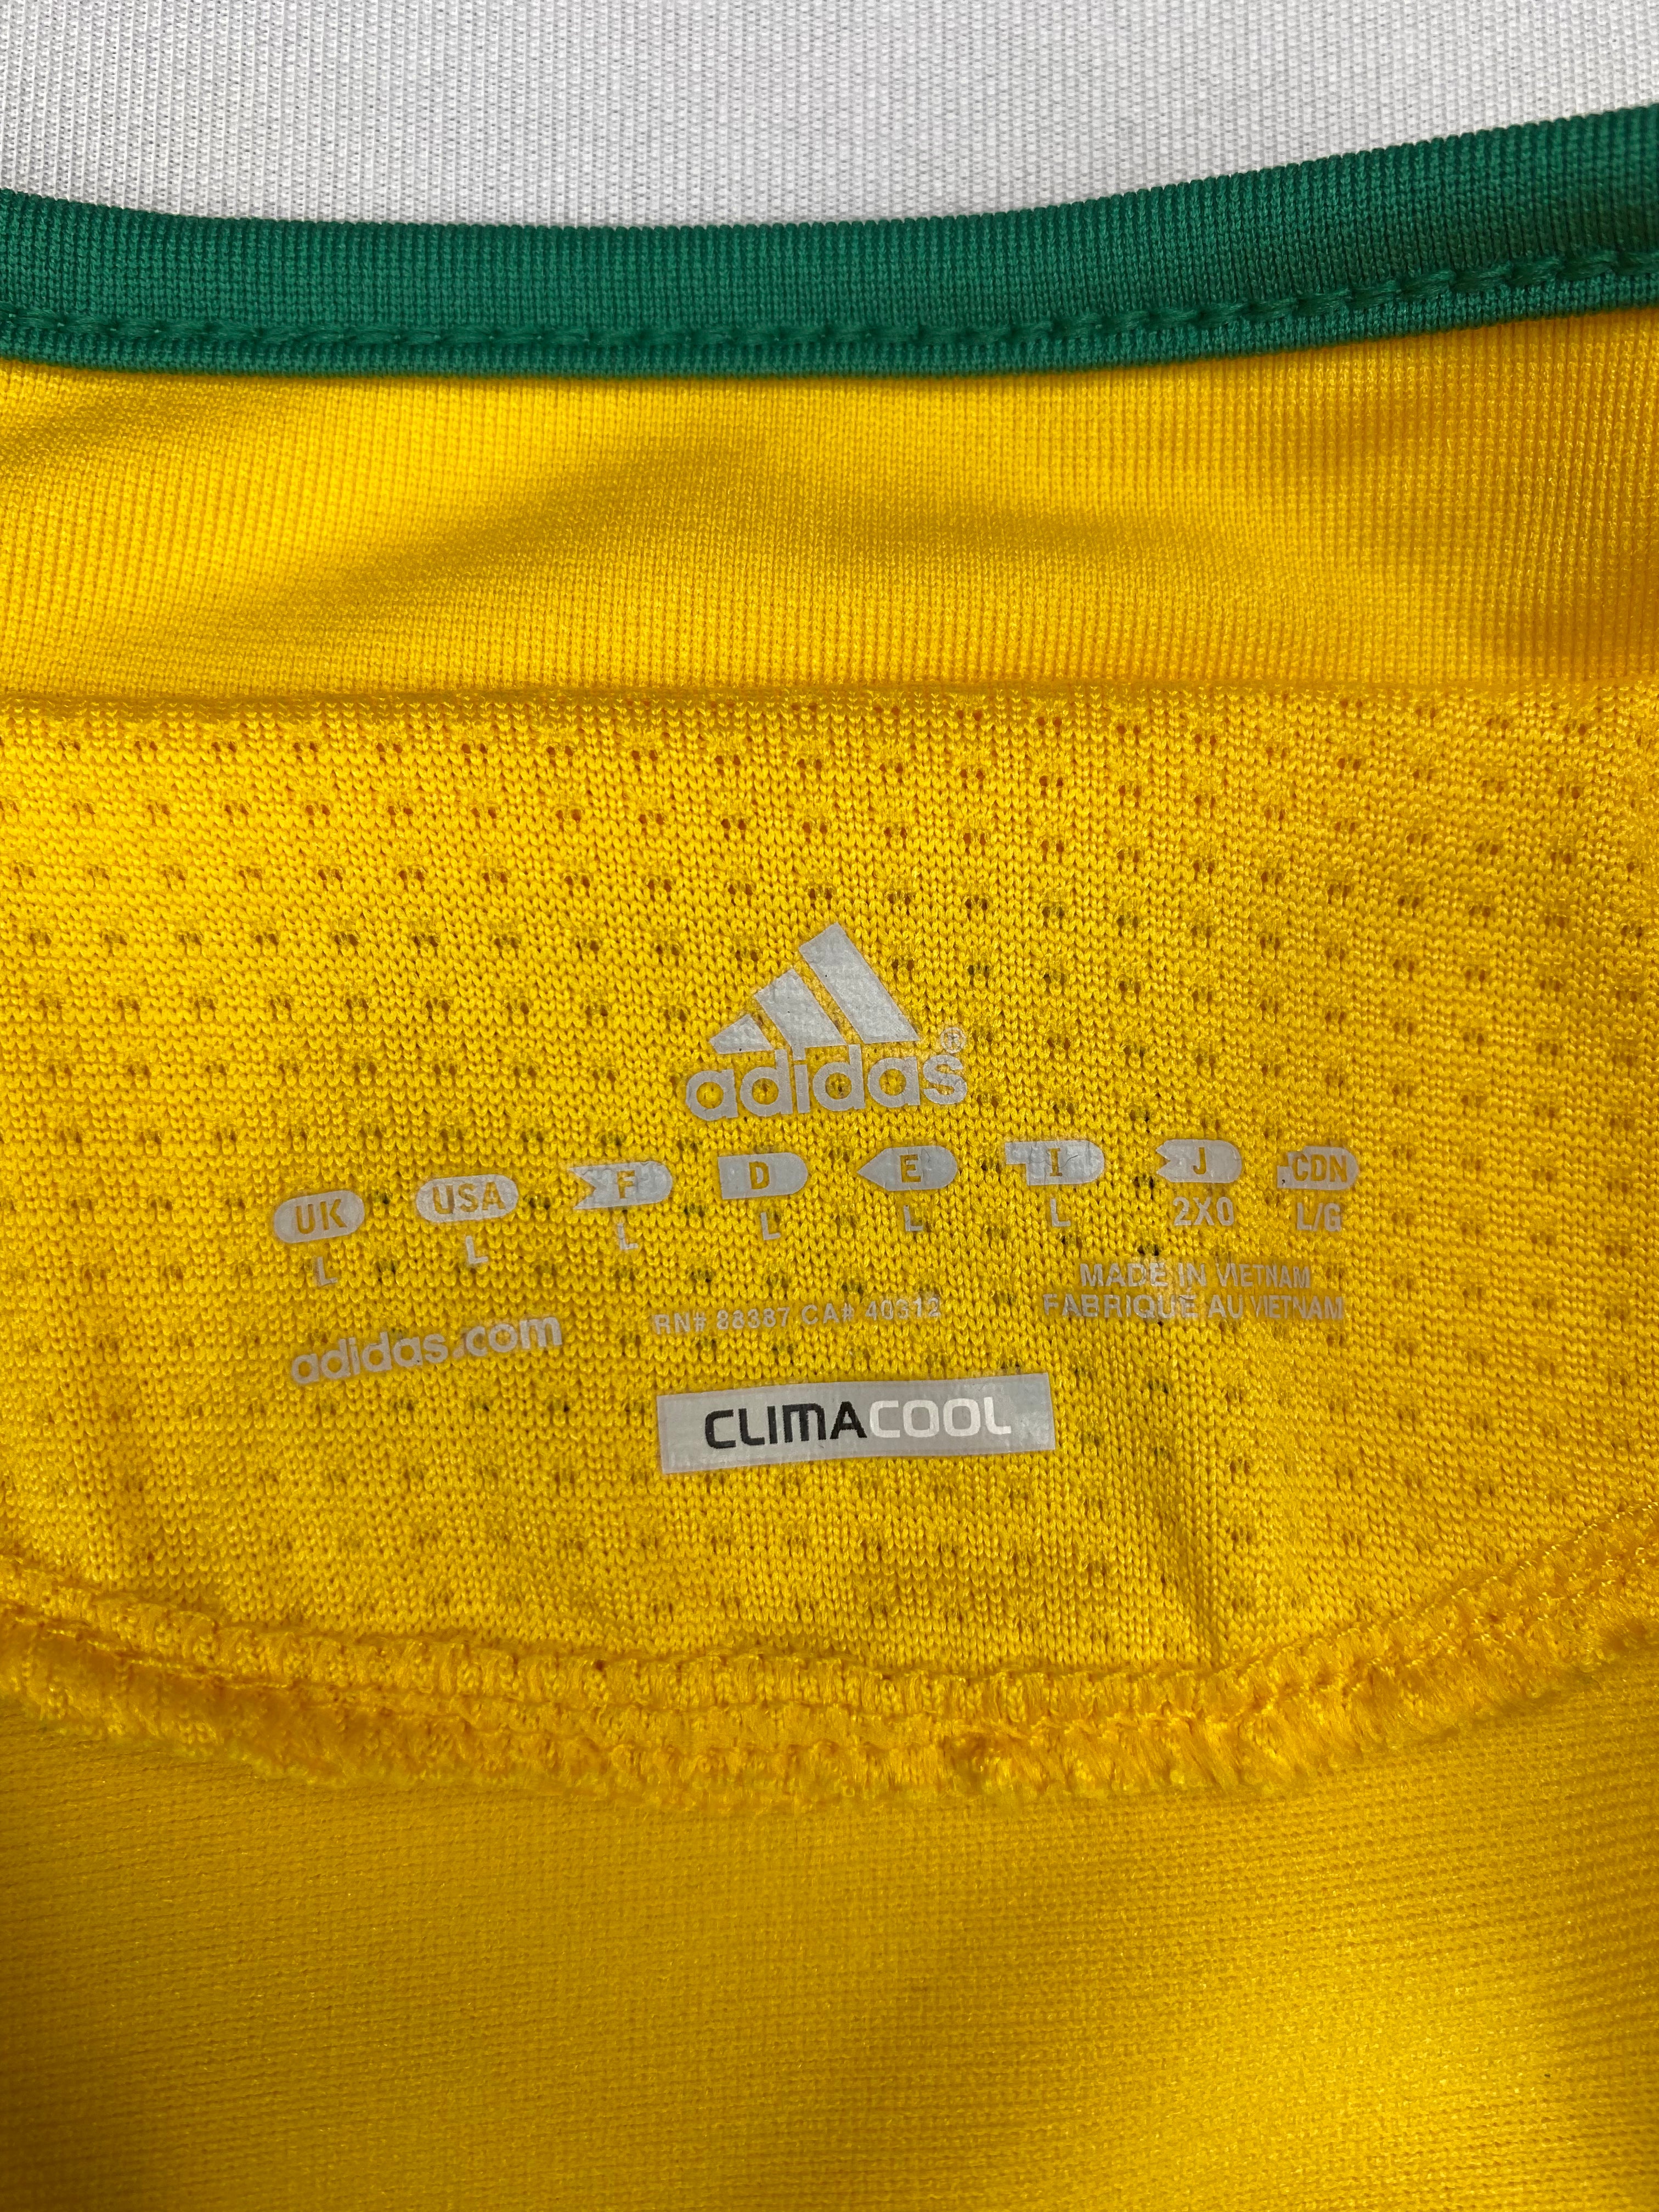 2010/11 South Africa Home Shirt (L) 9/10